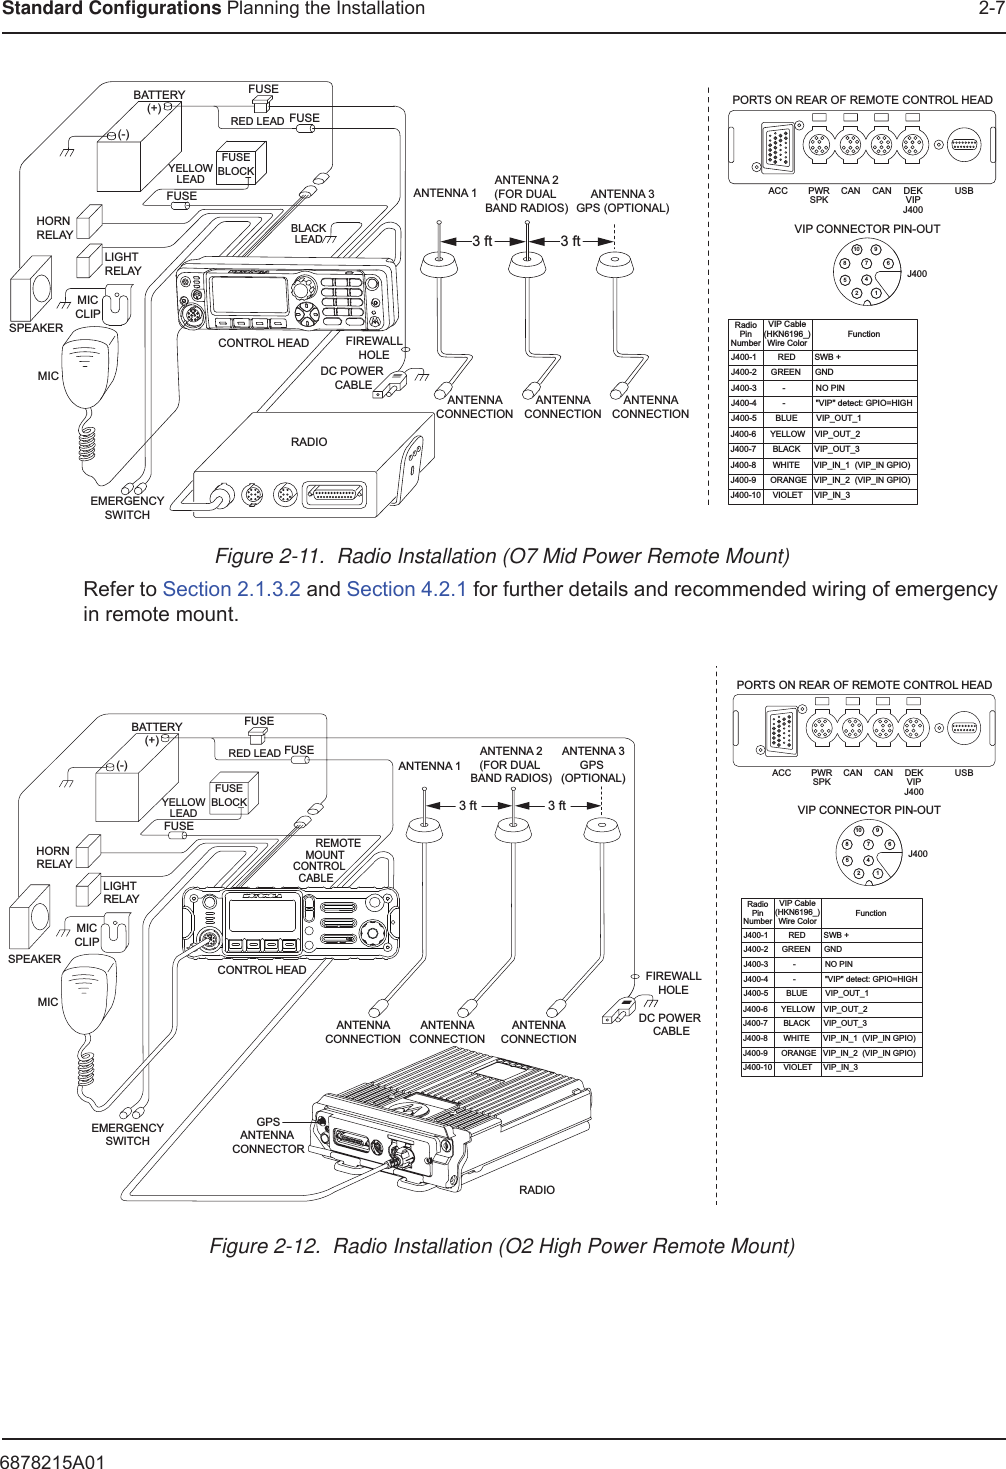 6878215A01Standard Configurations Planning the Installation 2-7Figure 2-11.  Radio Installation (O7 Mid Power Remote Mount)Refer to Section 2.1.3.2 and Section 4.2.1 for further details and recommended wiring of emergency in remote mount.Figure 2-12.  Radio Installation (O2 High Power Remote Mount)BATTERYHORN RELAYLIGHT RELAYMICCLIPSPEAKERMICEMERGENCYSWITCHRED LEADFUSEBLOCKYELLOWLEADBLACKLEAD(+)(-)FUSEFUSECONTROL HEAD  FIREWALLHOLEANTENNA CONNECTION ANTENNA 1DC POWER CABLERADIOFUSEANTENNA CONNECTION ANTENNA 2(FOR DUAL BAND RADIOS)ANTENNA CONNECTION ANTENNA 3GPS (OPTIONAL)PWRSPKJ400-1         RED        SWB +J400-2      GREEN      GNDJ400-3           -             NO PINJ400-4           -             &quot;VIP&quot; detect: GPIO=HIGHJ400-5        BLUE        VIP_OUT_1 J400-6      YELLOW    VIP_OUT_2J400-7       BLACK      VIP_OUT_3J400-8       WHITE      VIP_IN_1  (VIP_IN GPIO)J400-9      ORANGE   VIP_IN_2  (VIP_IN GPIO)J400-10     VIOLET     VIP_IN_3 CAN CAN DEKVIPJ400ACC USBPORTS ON REAR OF REMOTE CONTROL HEADVIP CONNECTOR PIN-OUTJ4006910742581RadioPinNumberVIP Cable(HKN6196_)Wire ColorFunction3 ft 3 ftEMERGENCYSWITCHFIREWALLHOLEANTENNA CONNECTION GPSANTENNA CONNECTORDC POWER CABLEANTENNA CONNECTION RADIOCONTROL HEADBATTERYHORN RELAYLIGHT RELAYMICCLIPSPEAKERMICRED LEADFUSEBLOCKYELLOWLEAD(+)(-)FUSEFUSE               REMOTE      MOUNT     CONTROL   CABLEANTENNA 1ANTENNA 2(FOR DUAL BAND RADIOS)ANTENNA CONNECTION ANTENNA 3GPS (OPTIONAL)FUSEPWRSPKCAN CAN DEKVIPJ400ACC USBPORTS ON REAR OF REMOTE CONTROL HEADVIP CONNECTOR PIN-OUTJ4006910742581J400-1         RED        SWB +J400-2      GREEN      GNDJ400-3           -             NO PINJ400-4           -             &quot;VIP&quot; detect: GPIO=HIGHJ400-5        BLUE        VIP_OUT_1 J400-6      YELLOW    VIP_OUT_2J400-7       BLACK      VIP_OUT_3J400-8       WHITE      VIP_IN_1  (VIP_IN GPIO)J400-9      ORANGE   VIP_IN_2  (VIP_IN GPIO)J400-10     VIOLET     VIP_IN_3 RadioPinNumberVIP Cable(HKN6196_)Wire ColorFunction3 ft 3 ft